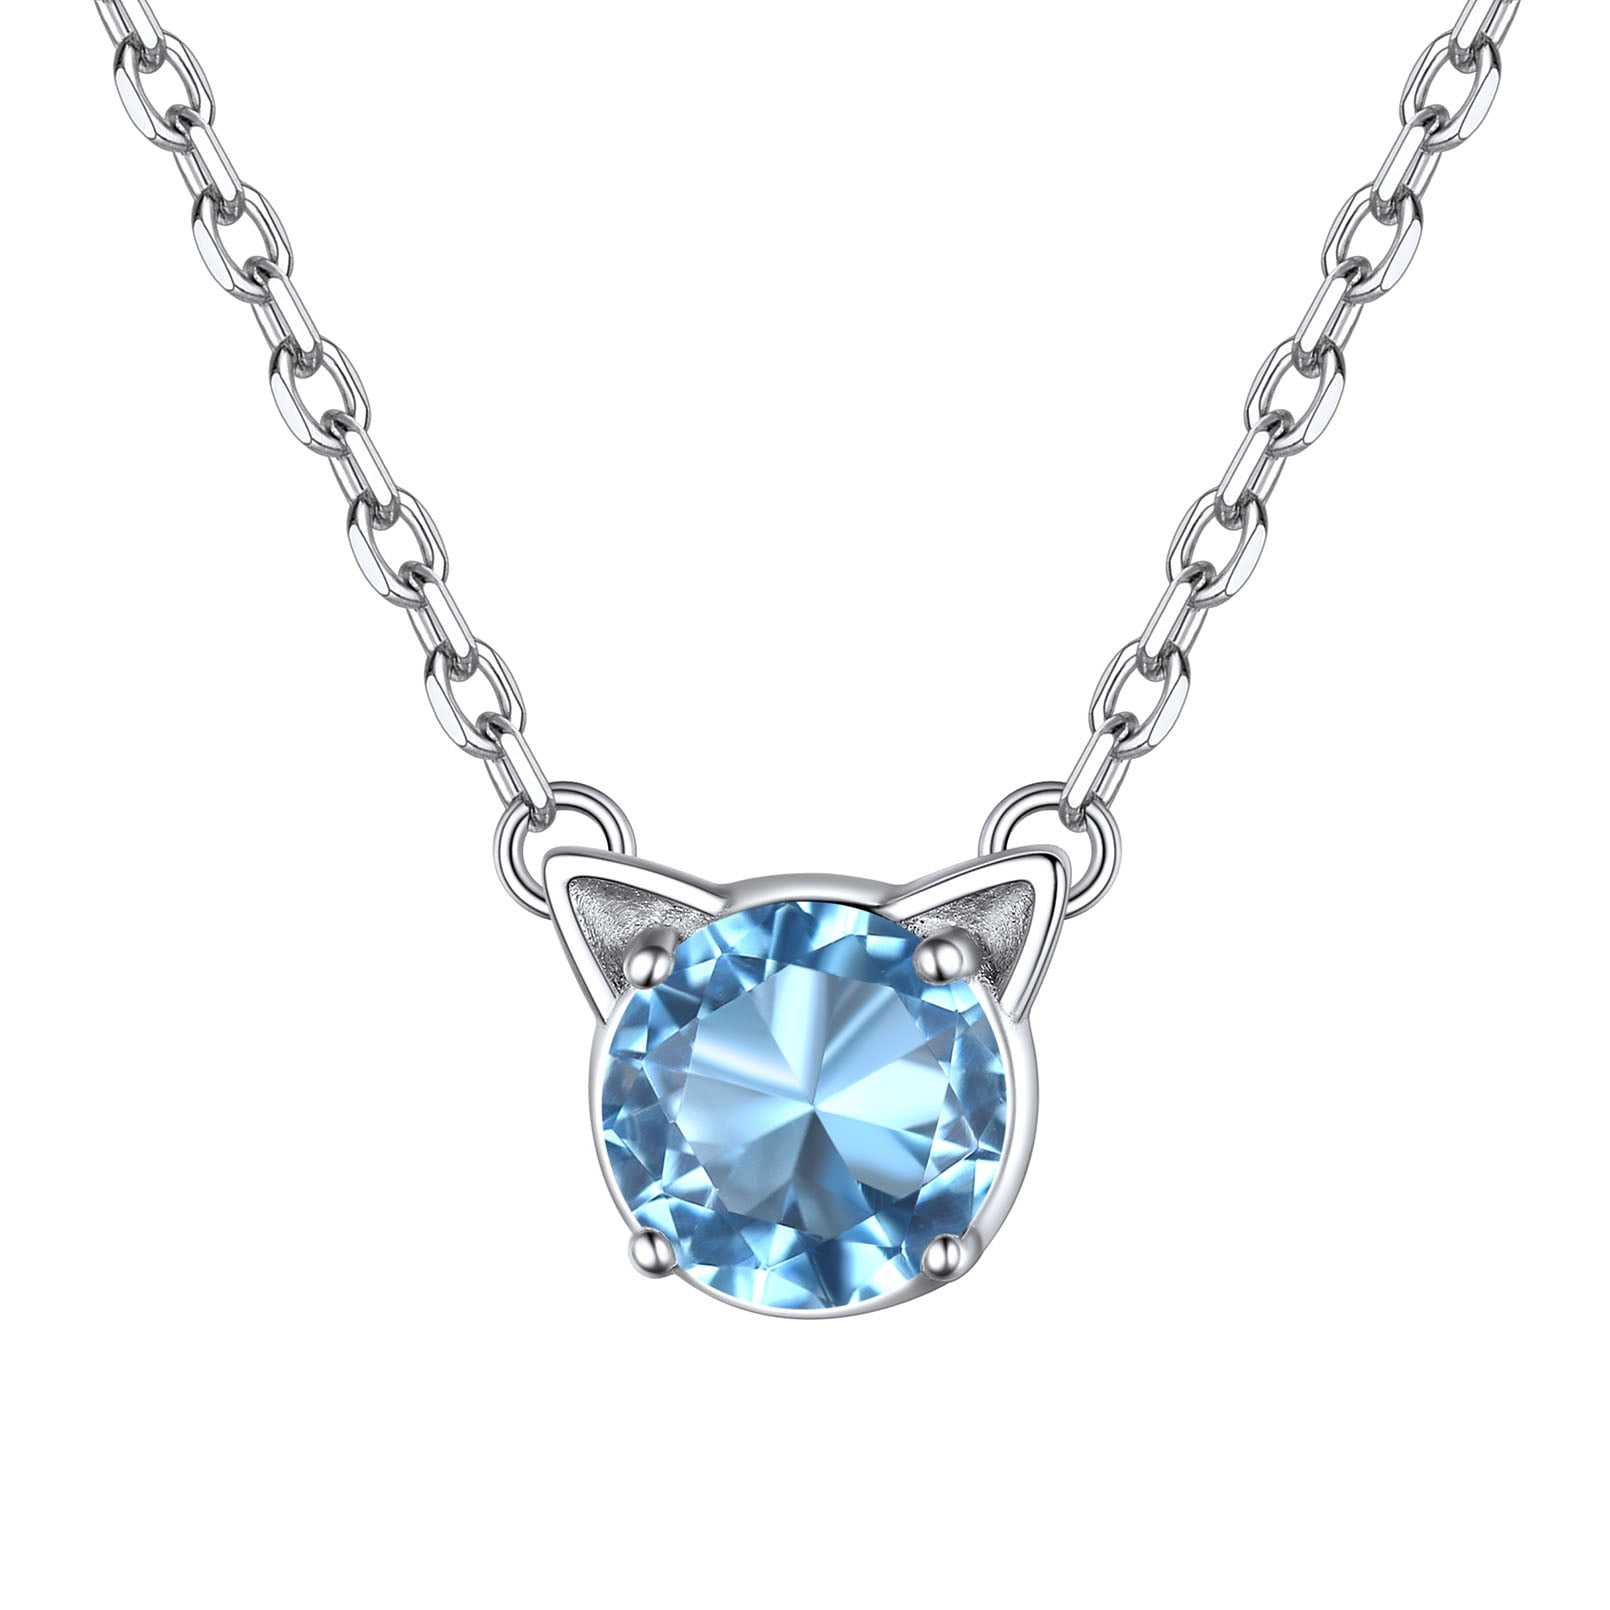 Aquamarine + Sterling Silver Necklace – Cape Cod Jewelers